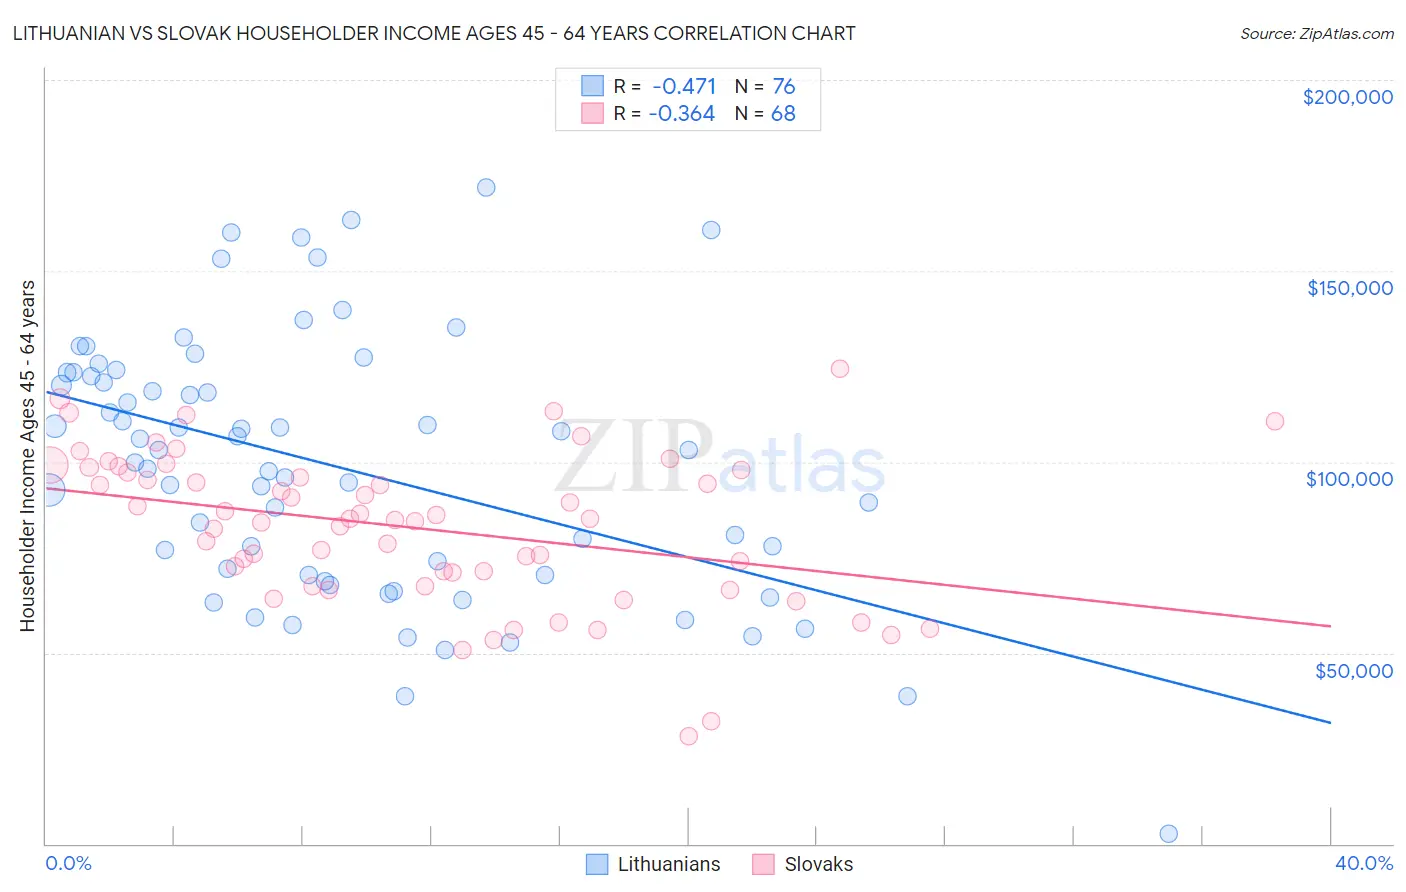 Lithuanian vs Slovak Householder Income Ages 45 - 64 years